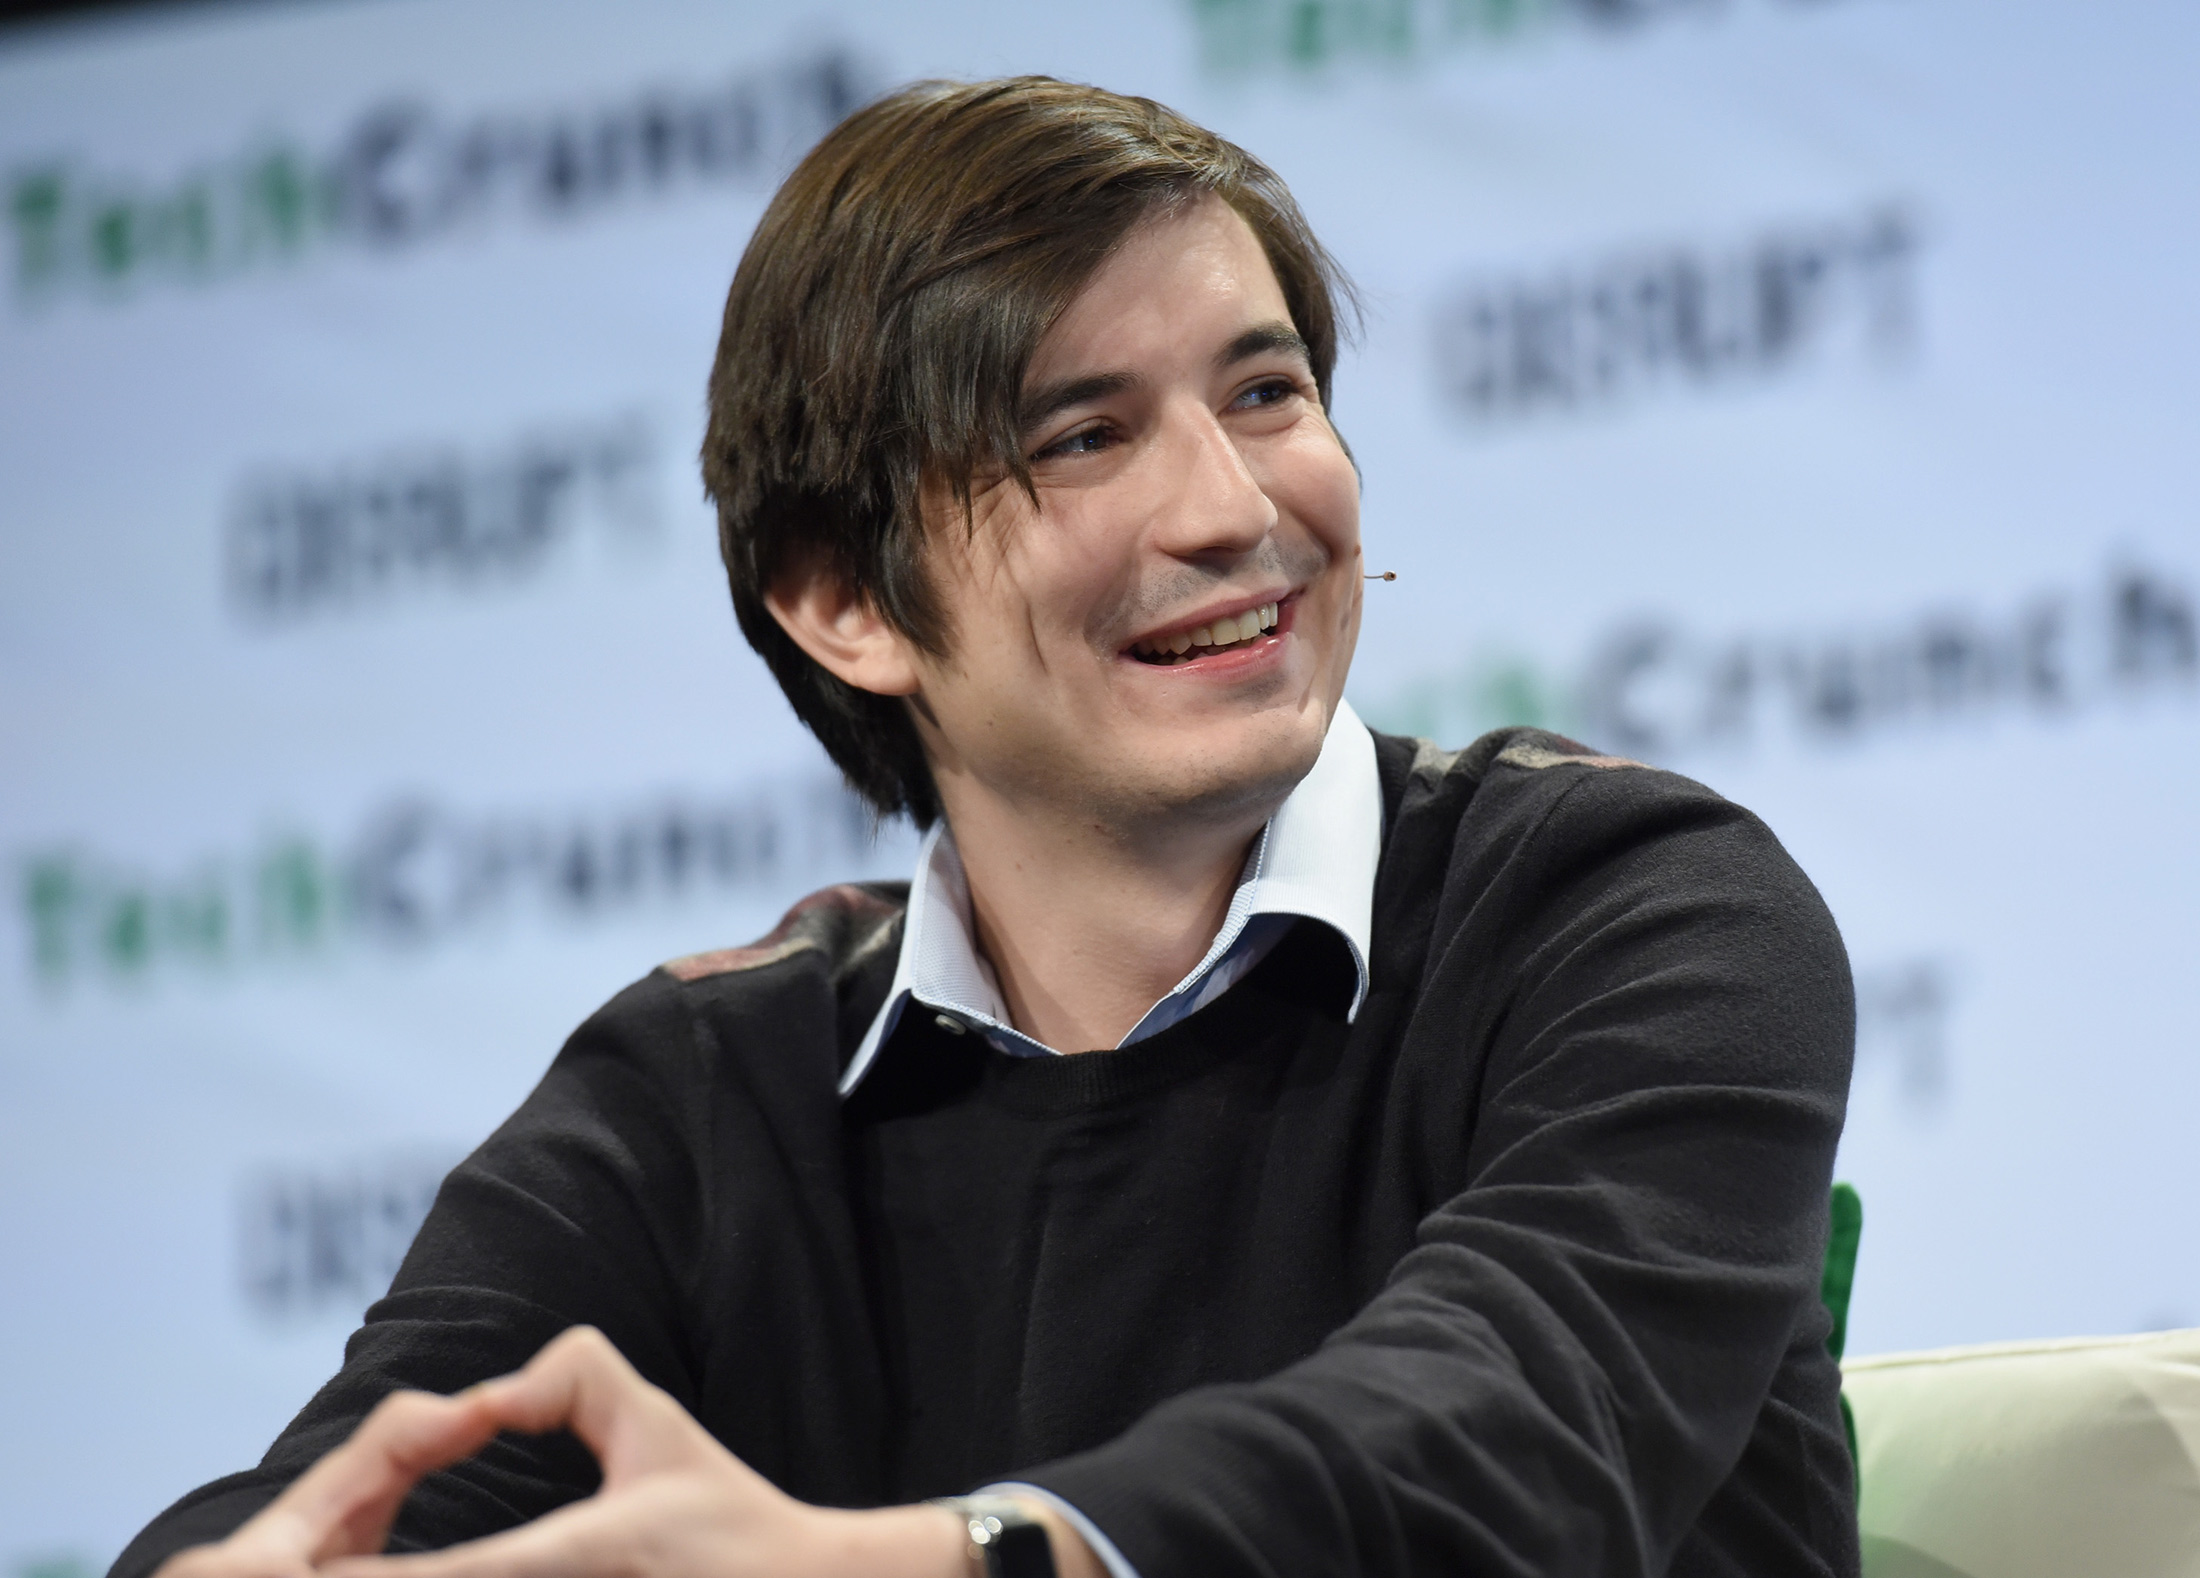 Robinhood is a top recruiter of advisers, here's why